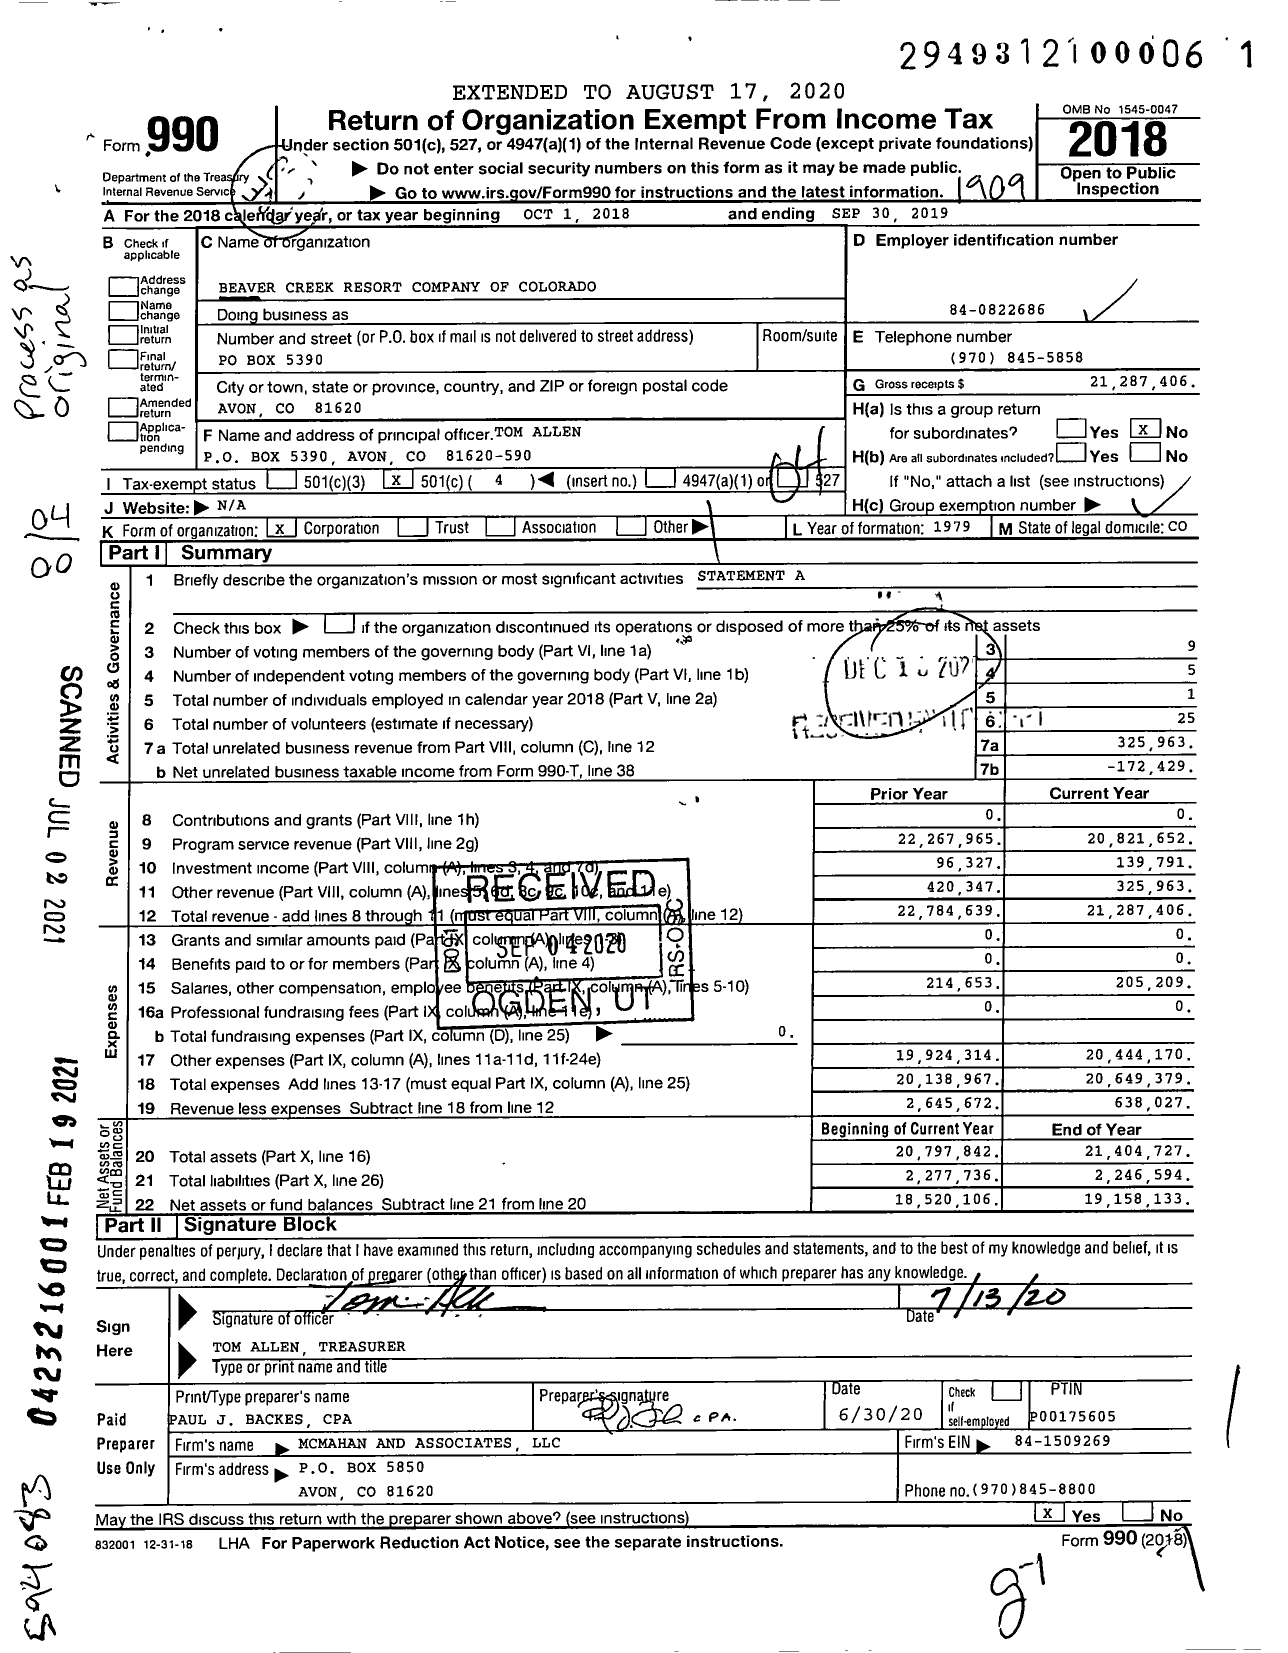 Image of first page of 2018 Form 990O for Beaver Creek Resort Company of Colorado